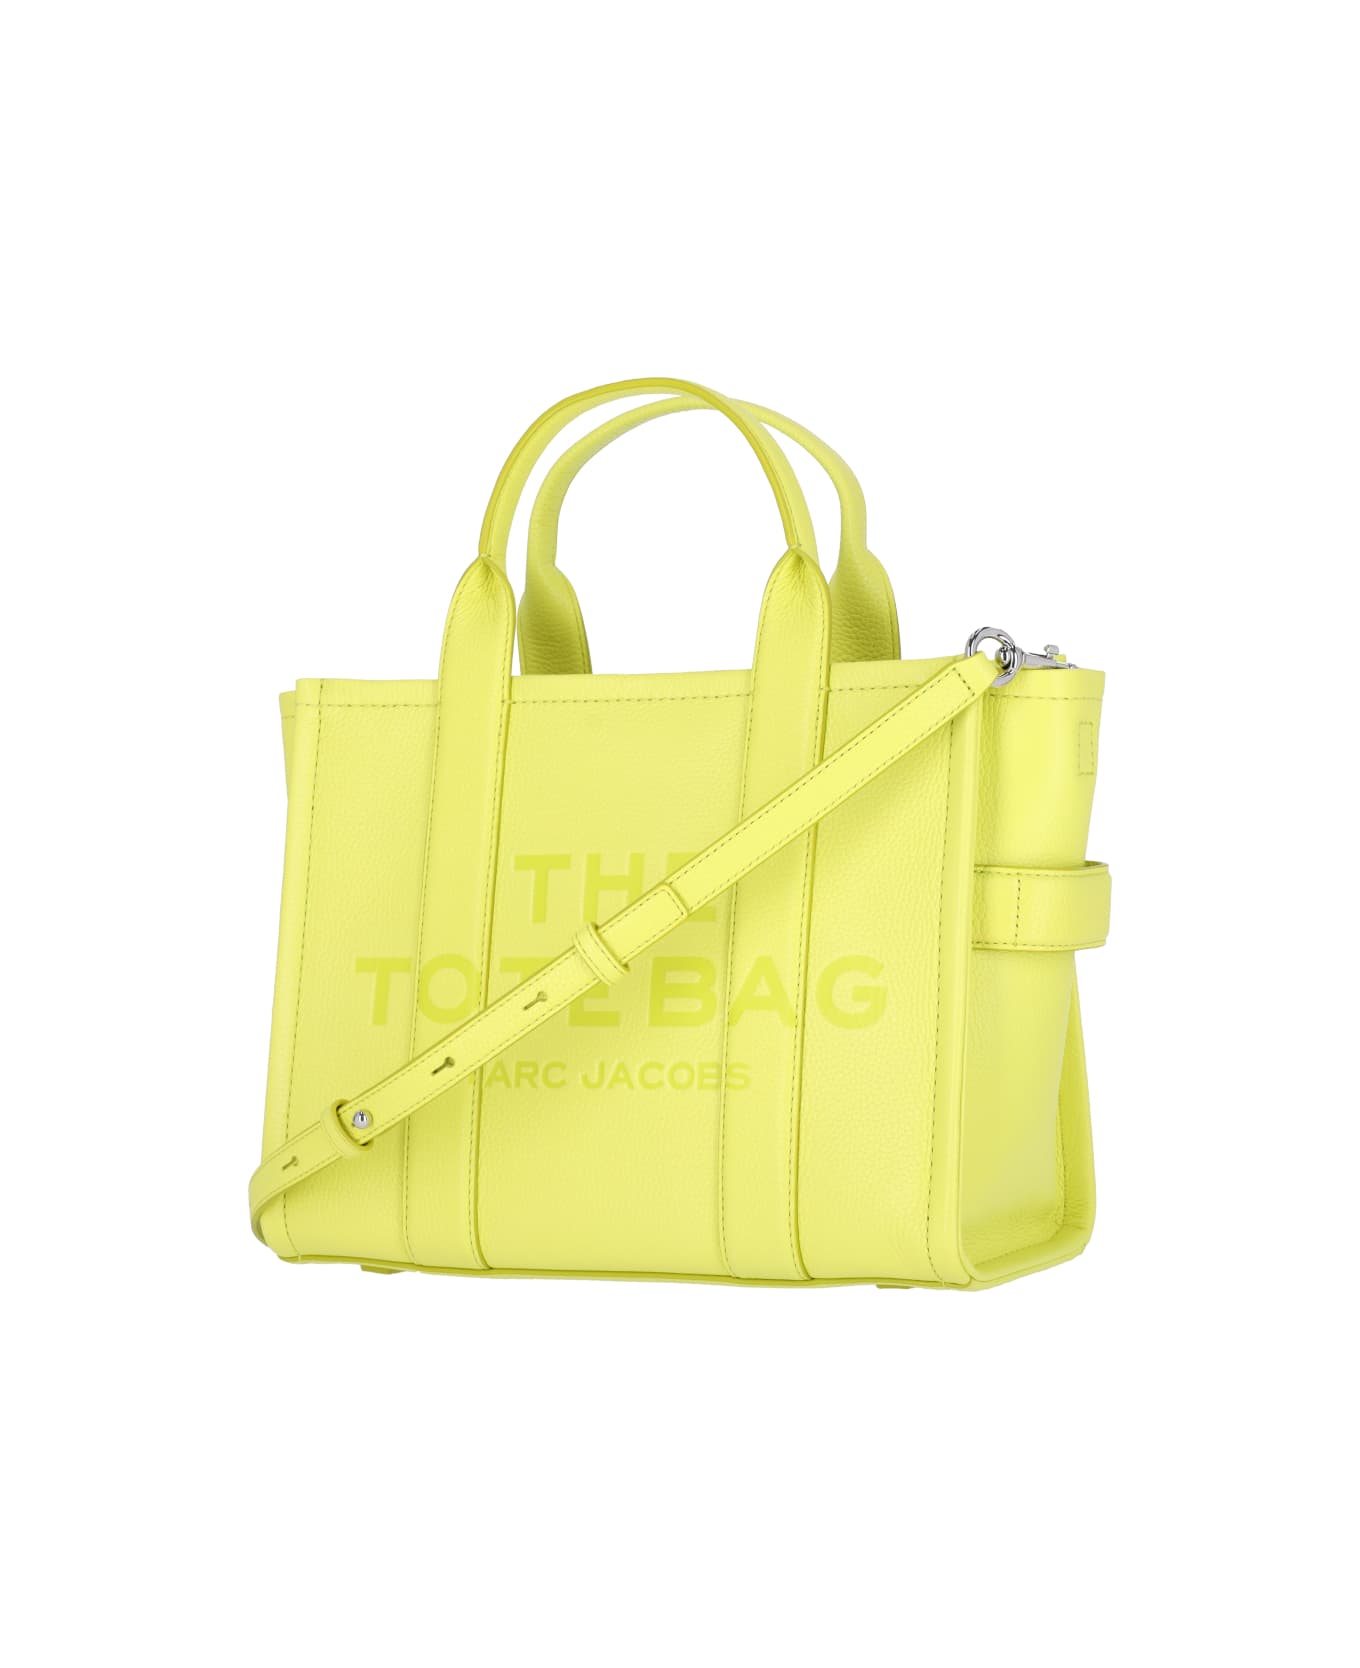 Marc Jacobs The Leather Medium Tote Bag - Yellow トートバッグ